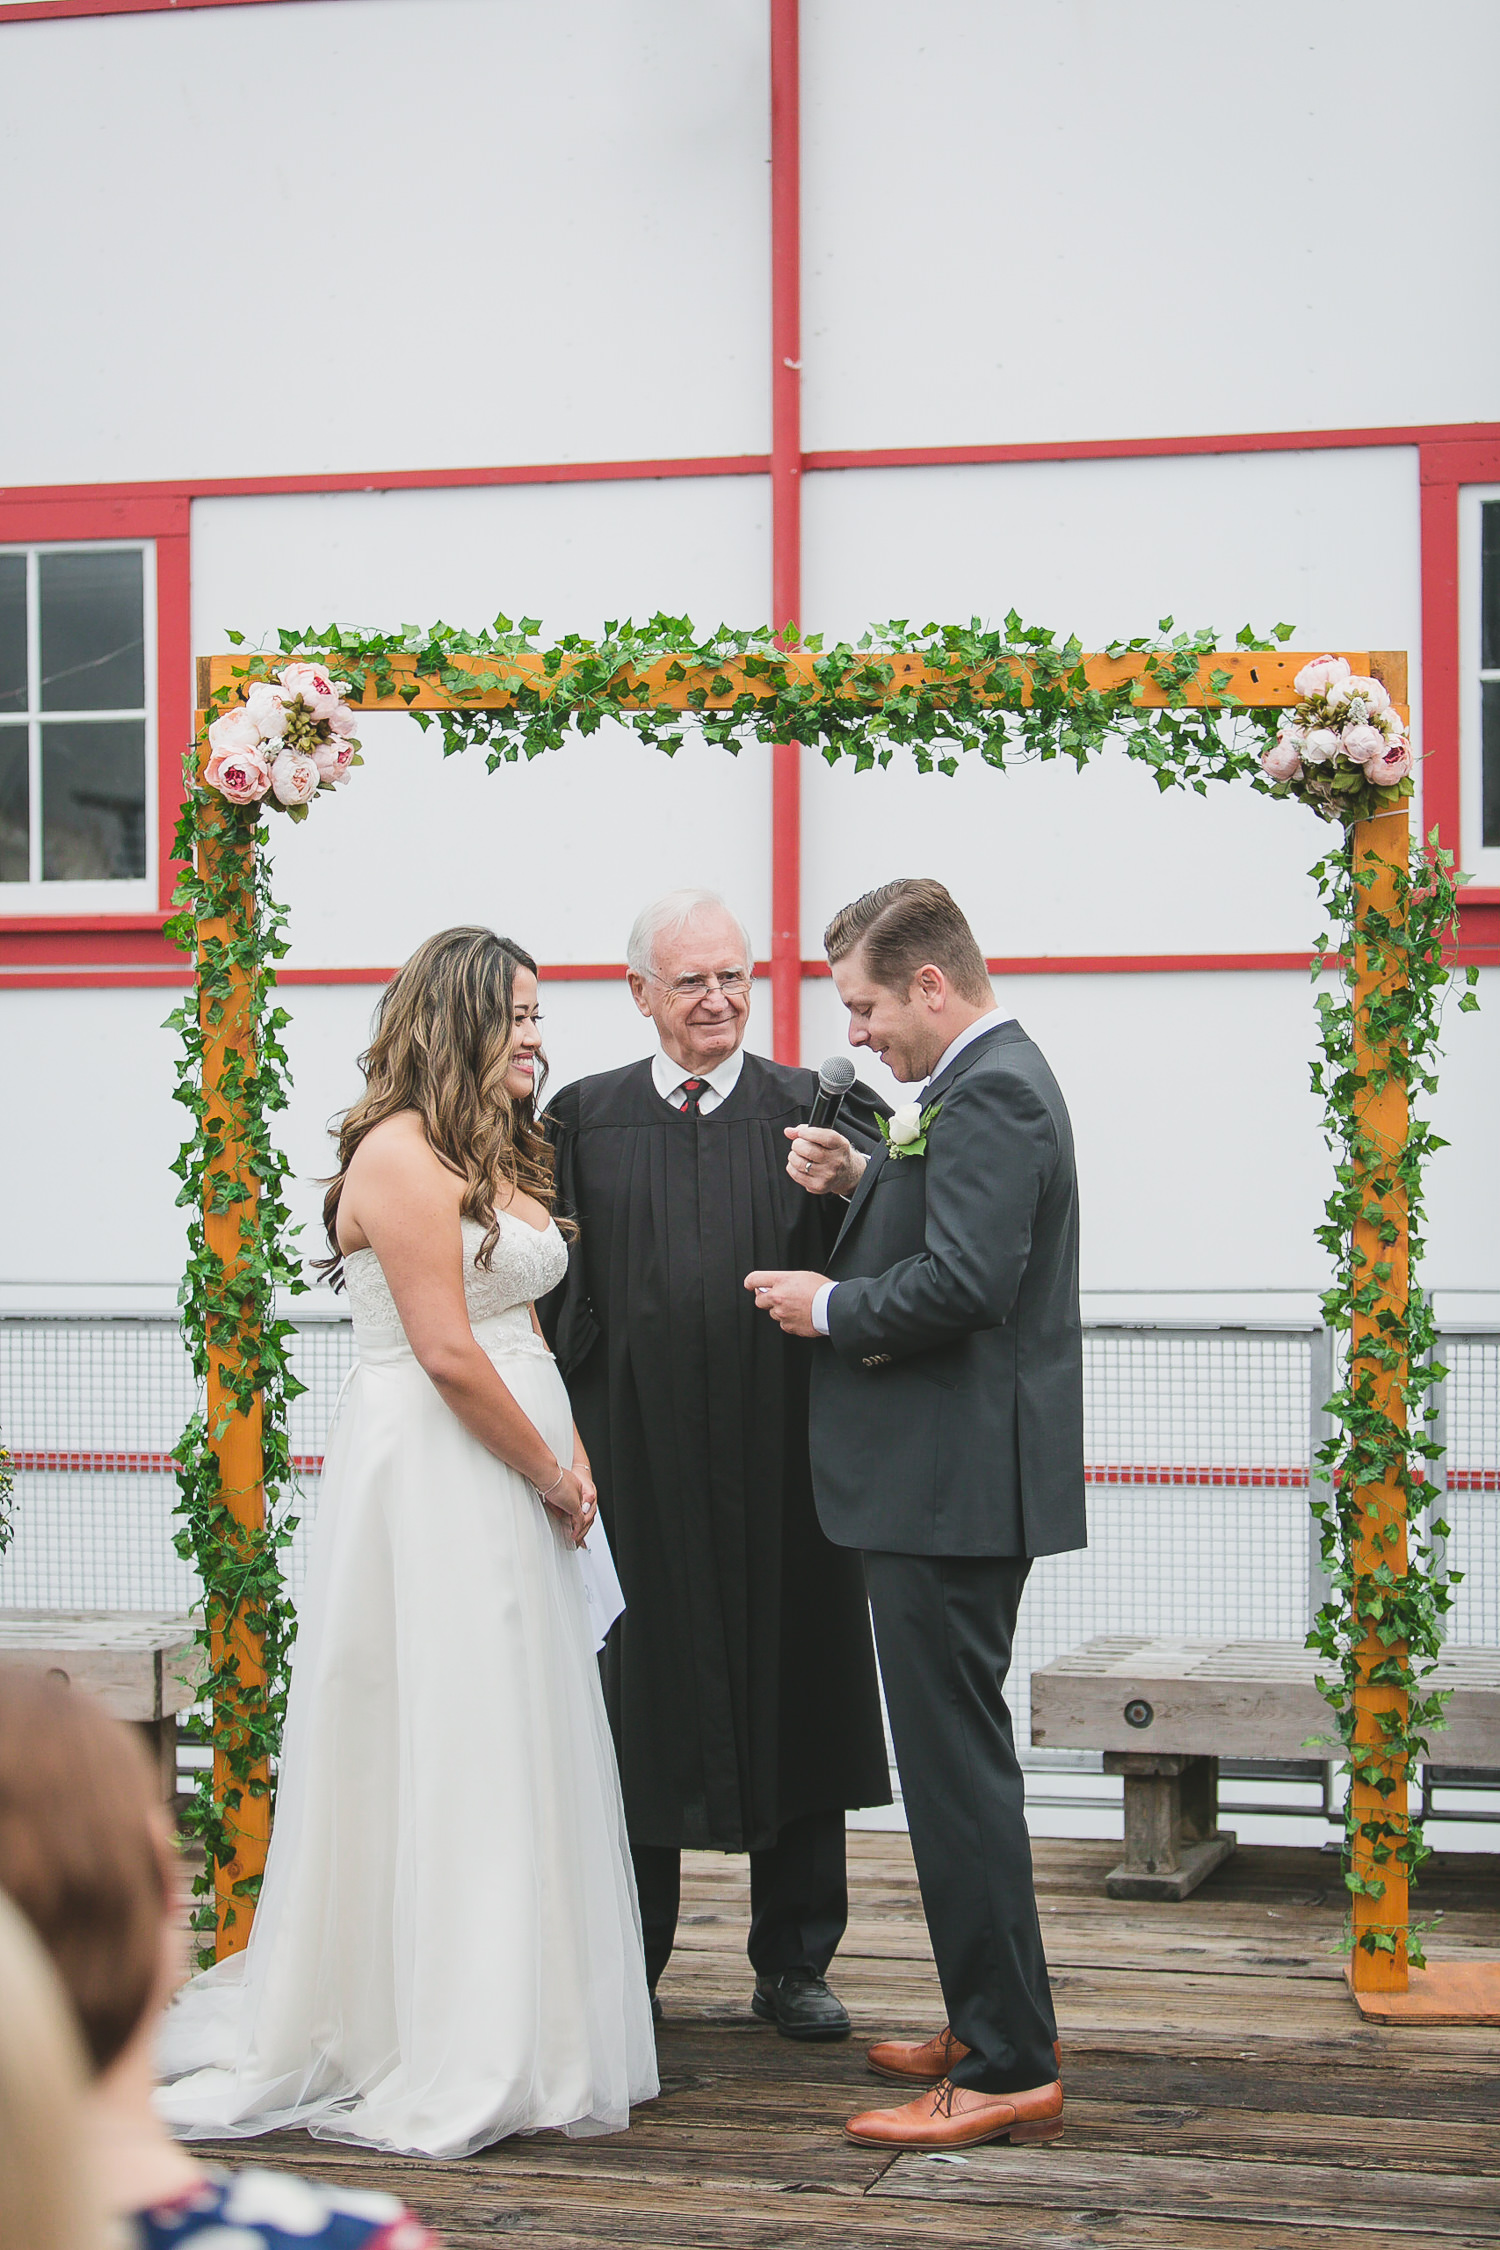 wedding ceremony in steveston with clarence ash officiant